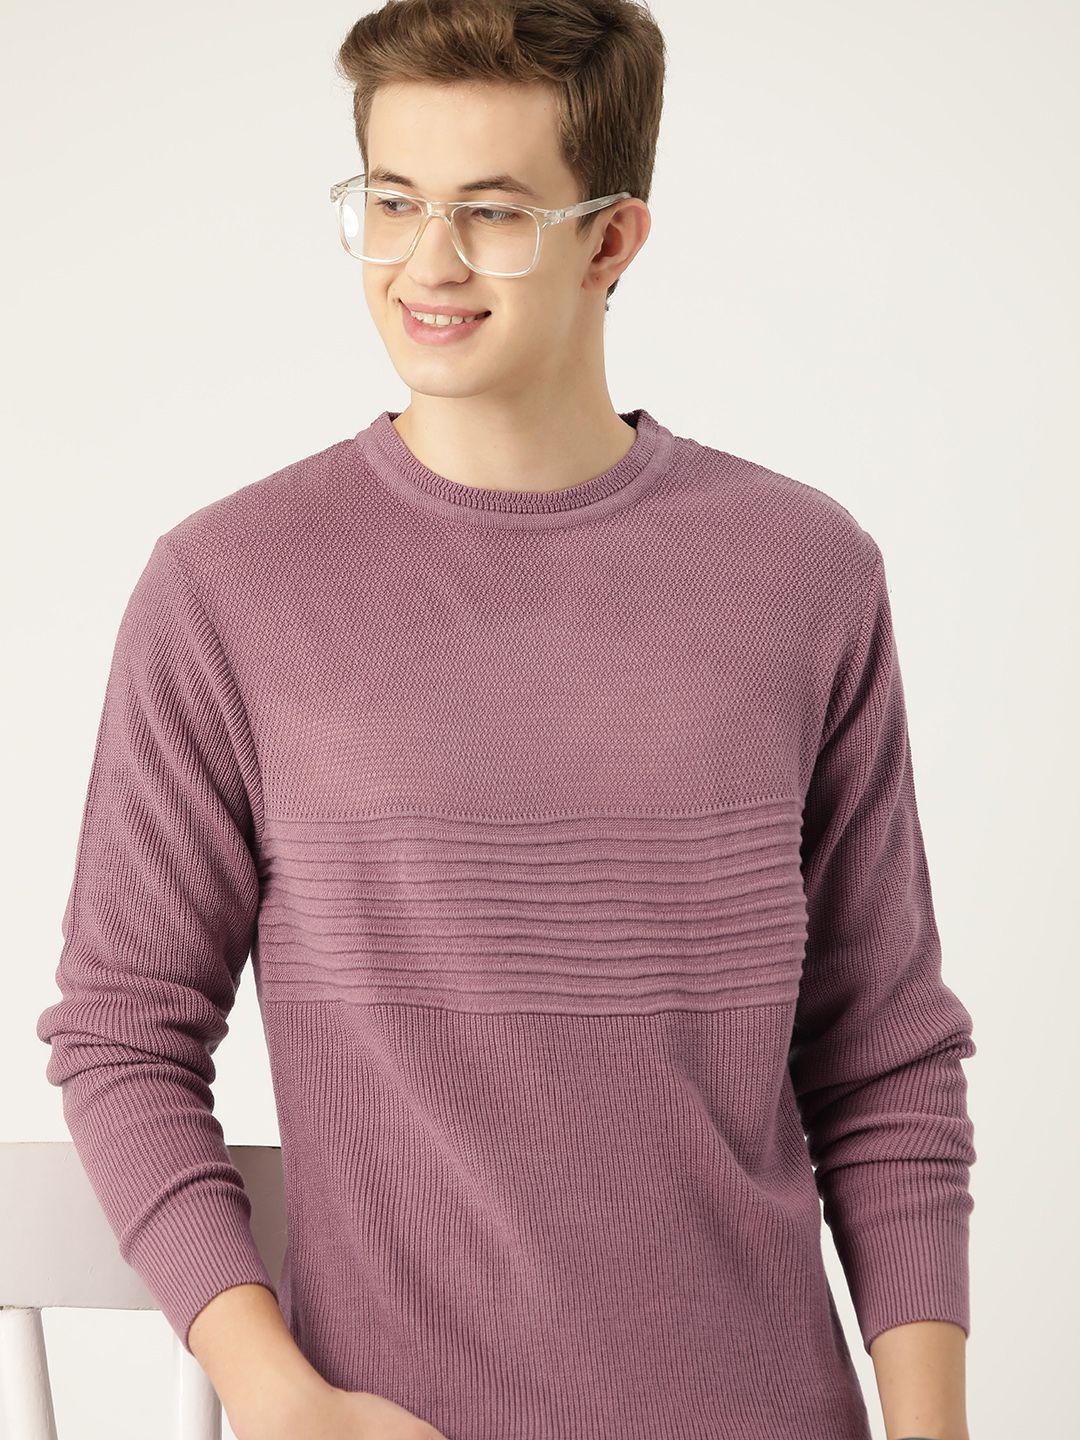 mast & harbour acrylic self-striped pullover